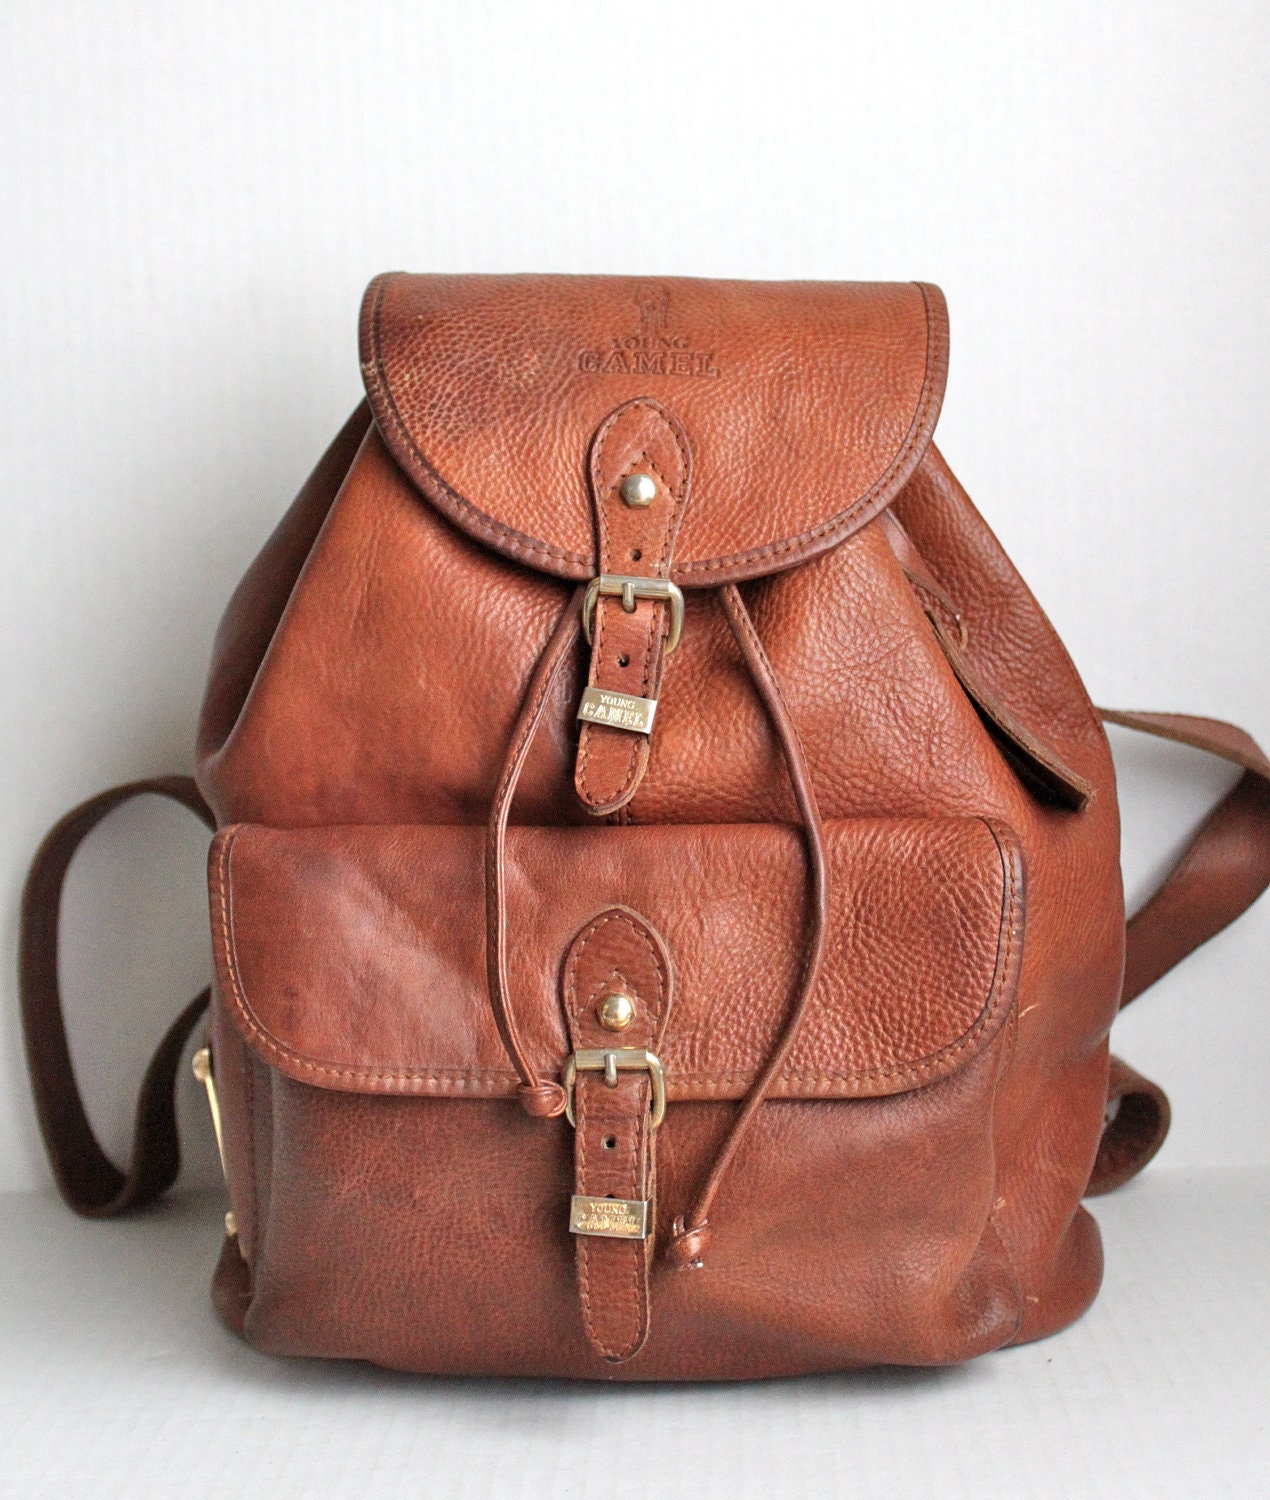 vintage Italian leather xl YOUNG CAMEL backpack // pebbled